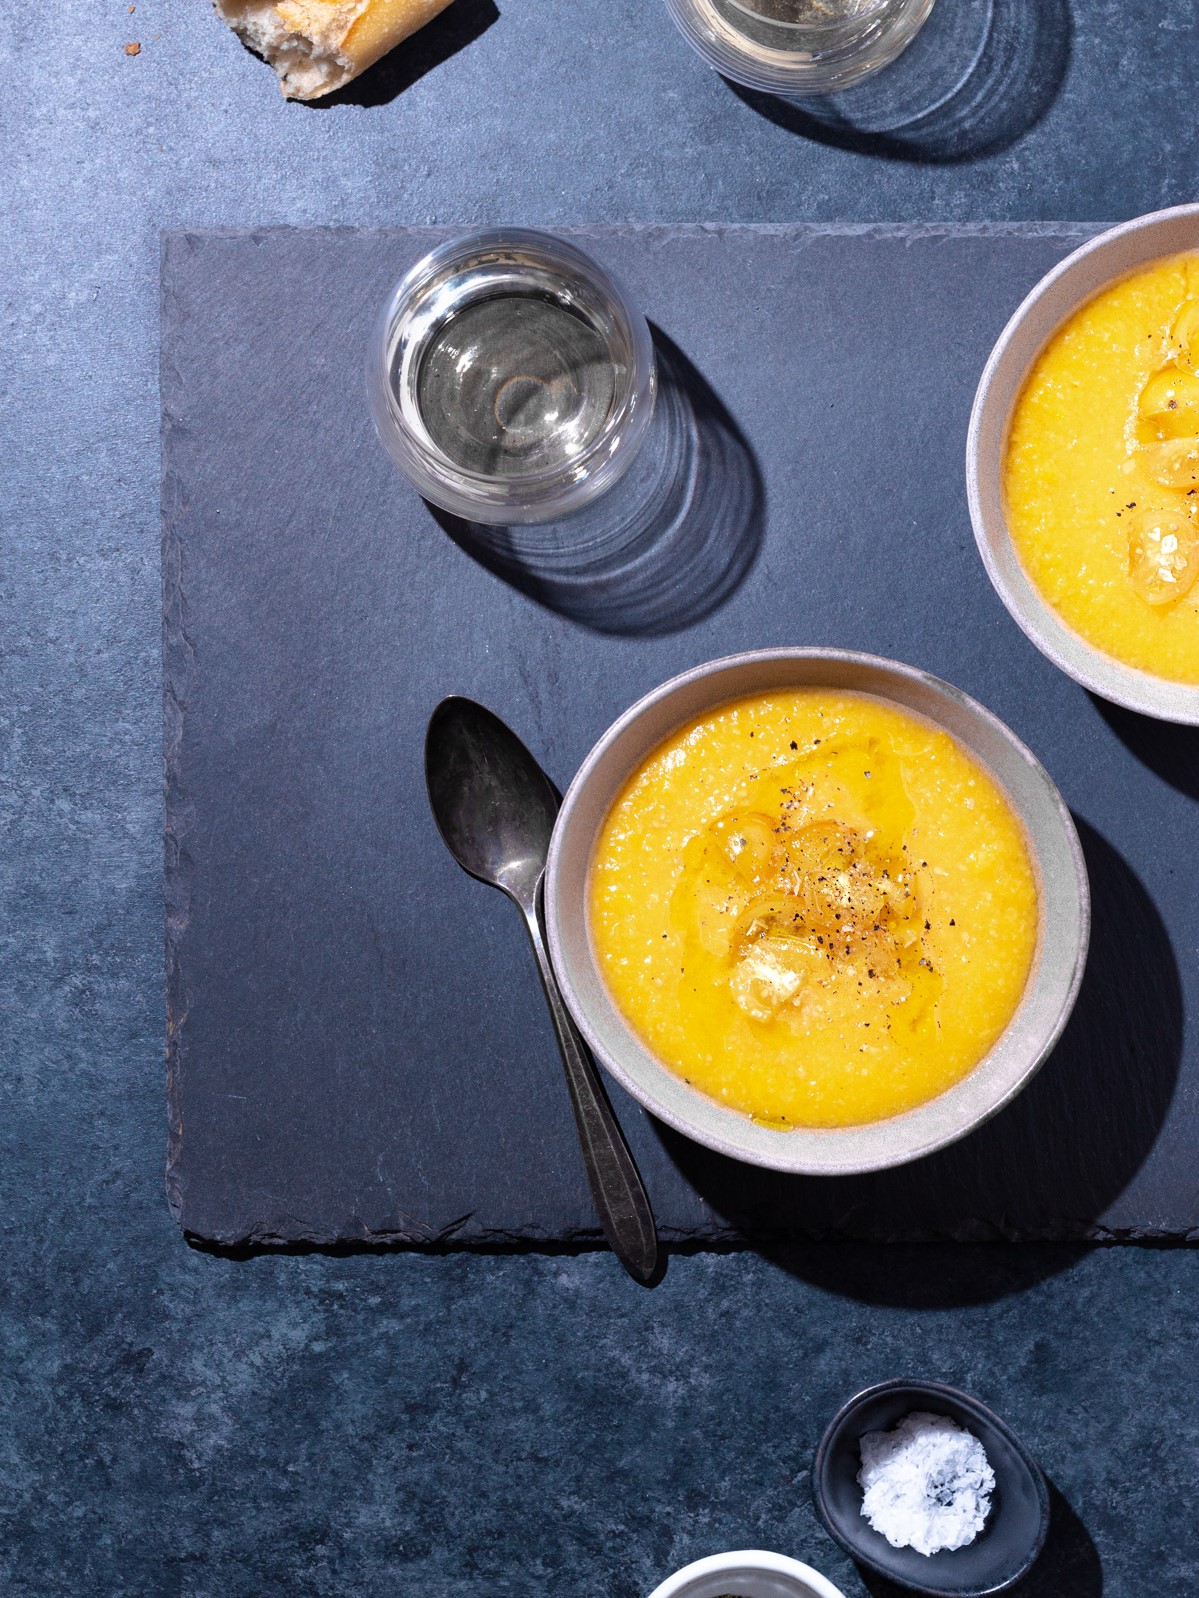 Overhead view of two bowls of yellow gazpacho and a grey-blue surface surrounded by glasses of white wine, crusty bread, a spoon and salt and pepper bowls.